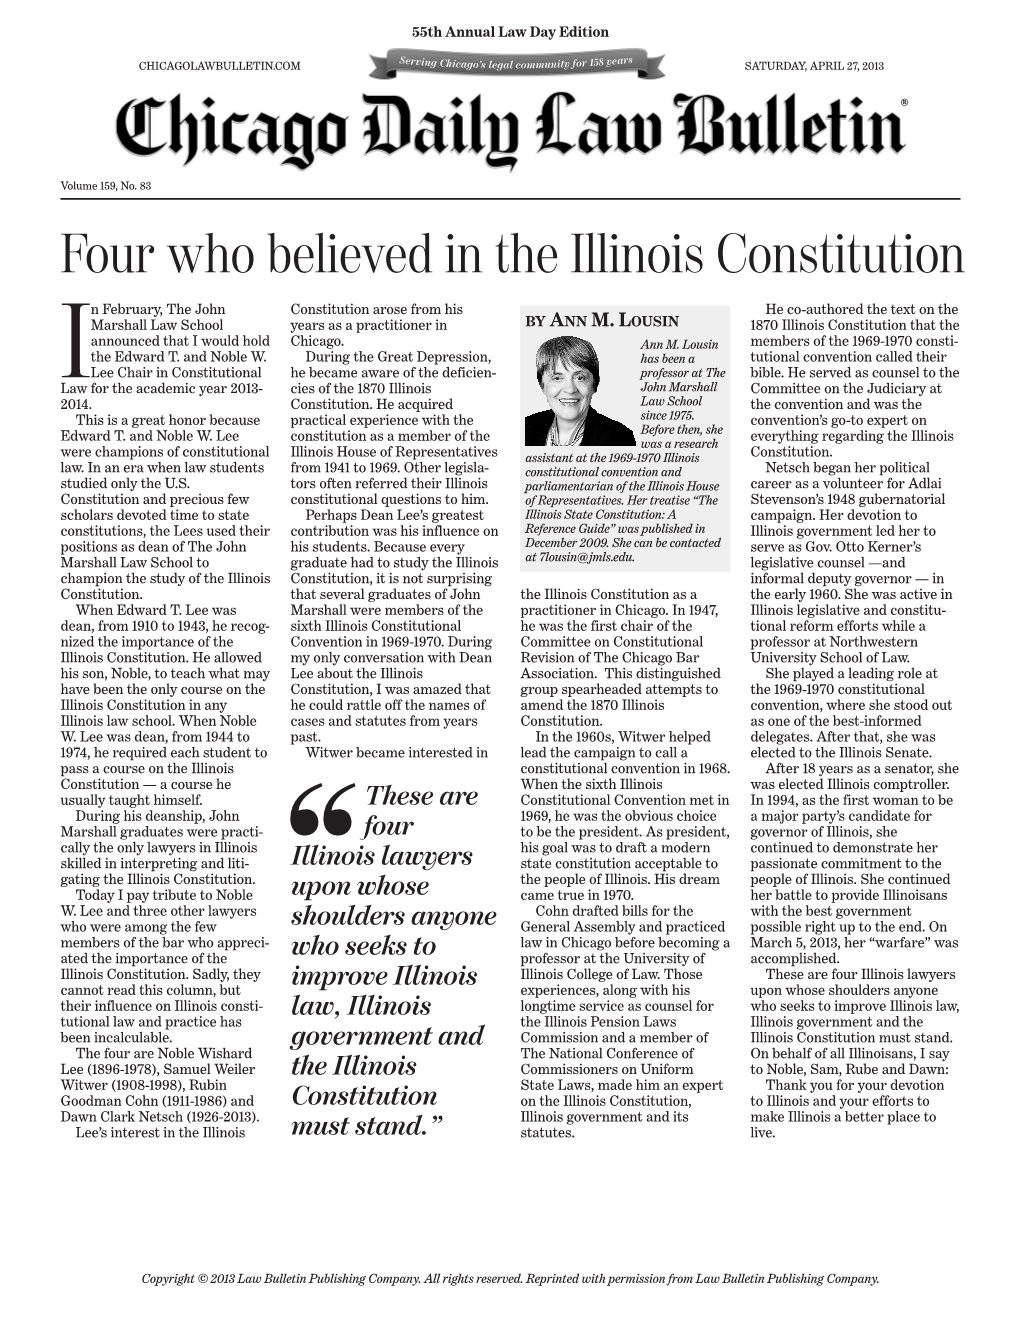 Four Who Believed in the Illinois Constitution